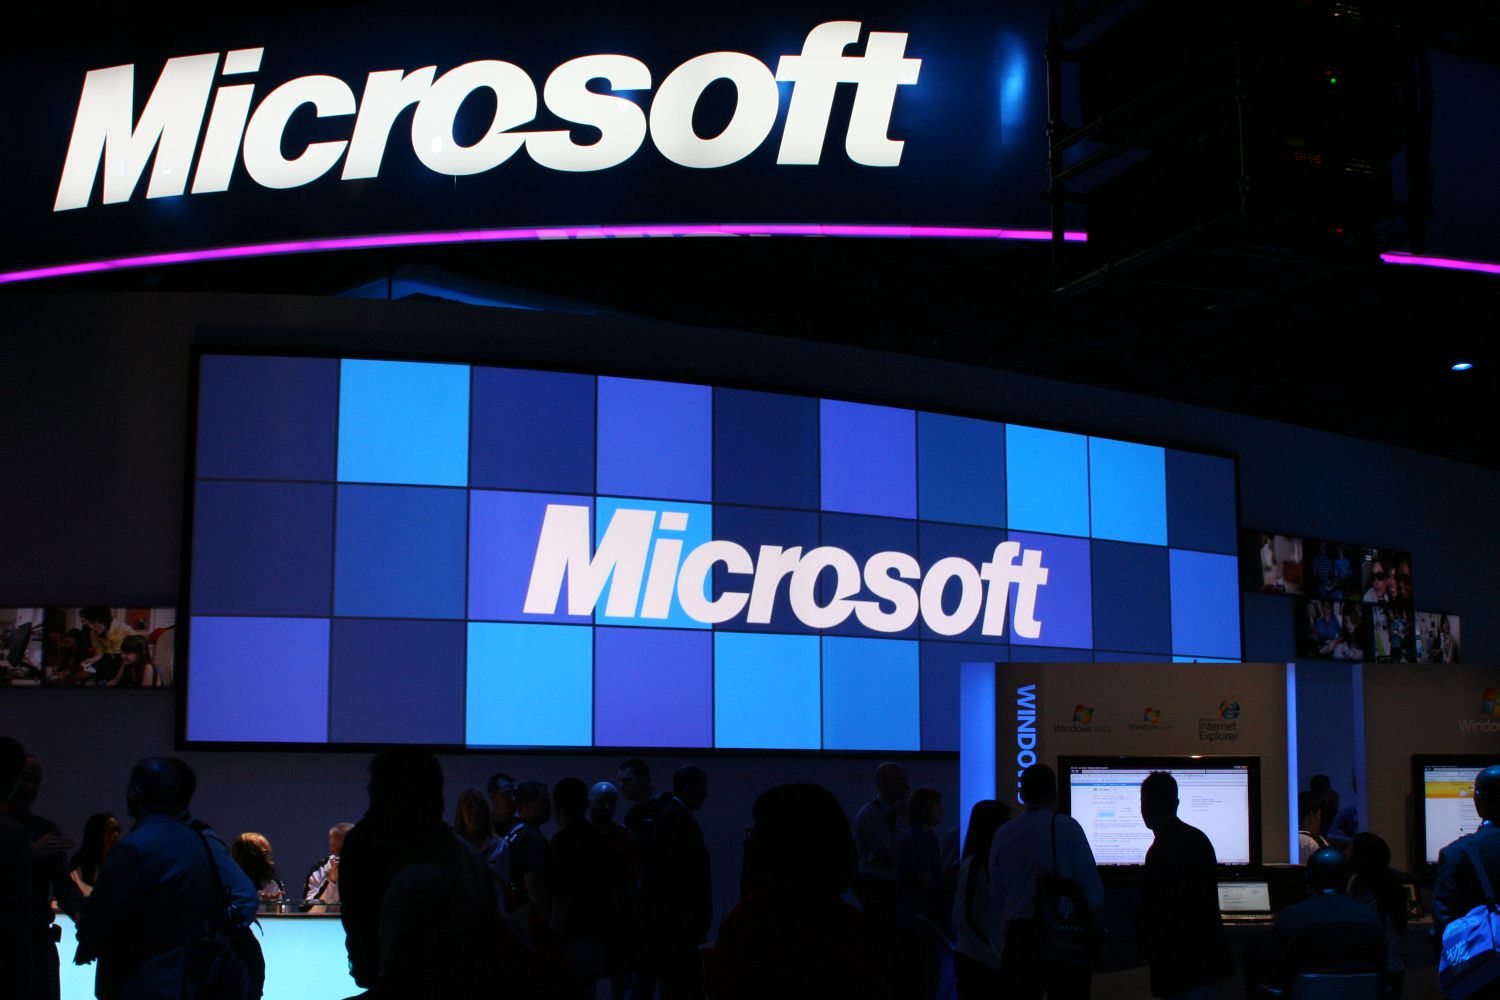 Microsoft-stand op CES 2009